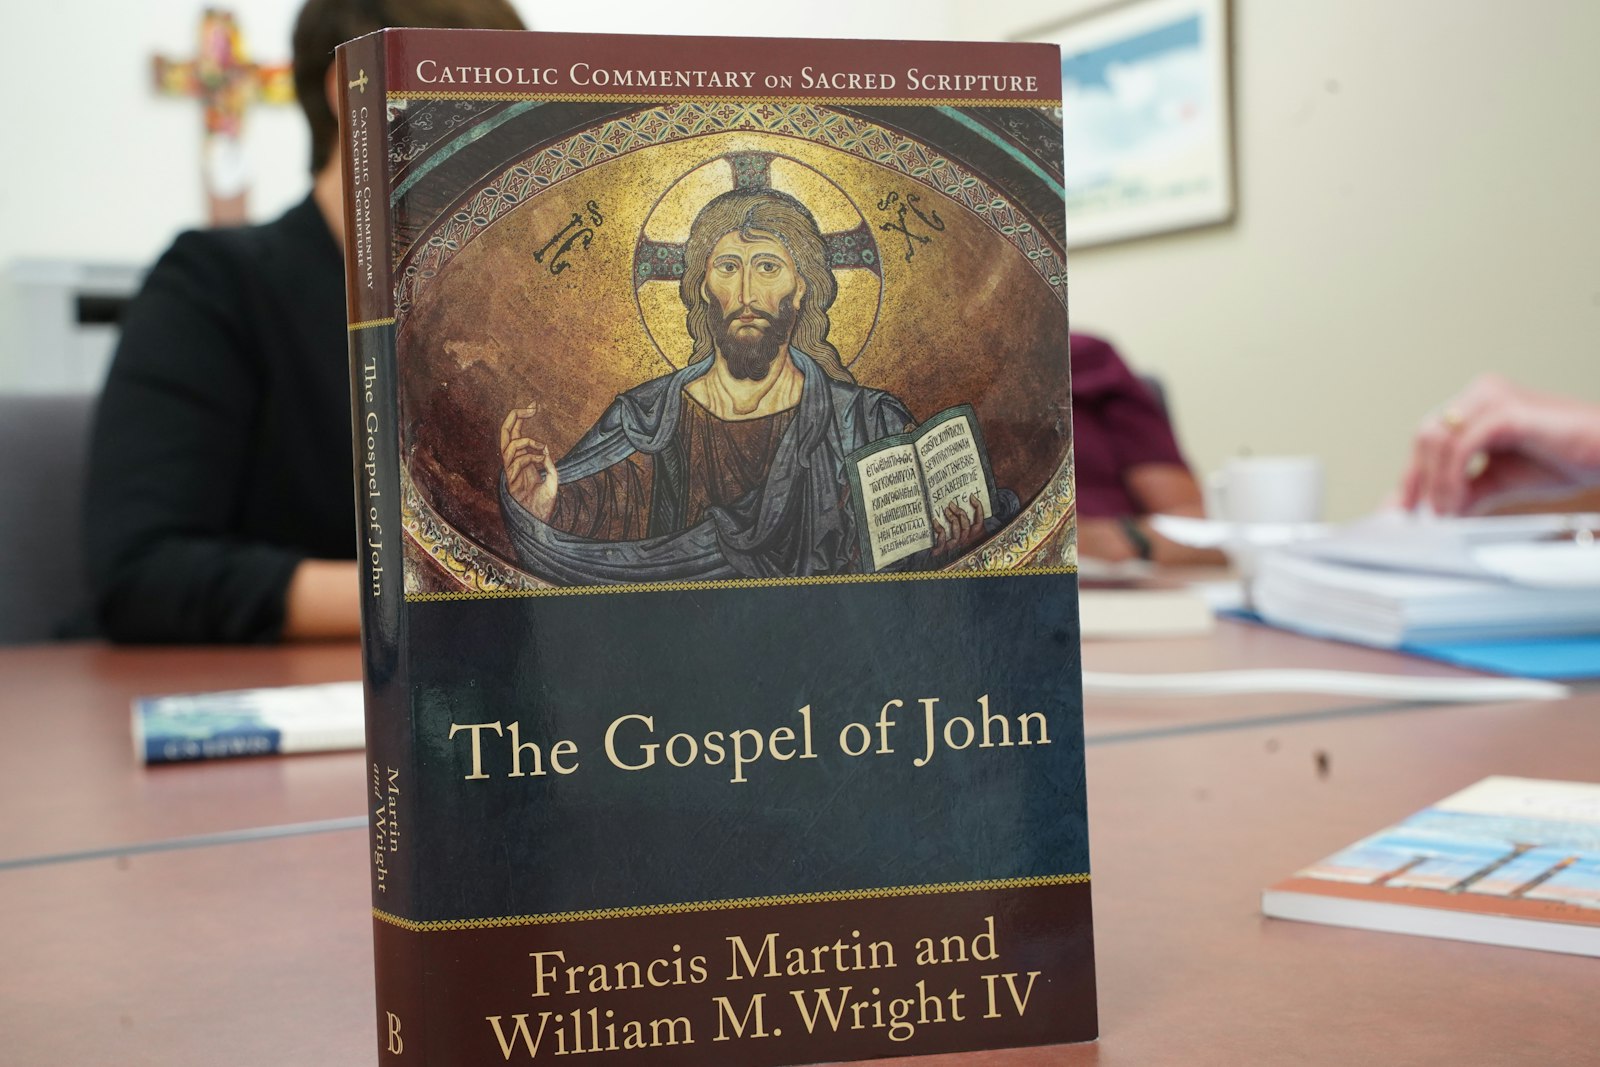 The Catholic Biblical School of Michigan curriculum covers four themes over four years: the history of God’s covenant with His chosen people, the synoptic Gospels, the early disciples and the Gospel according to St. John and Revelation.